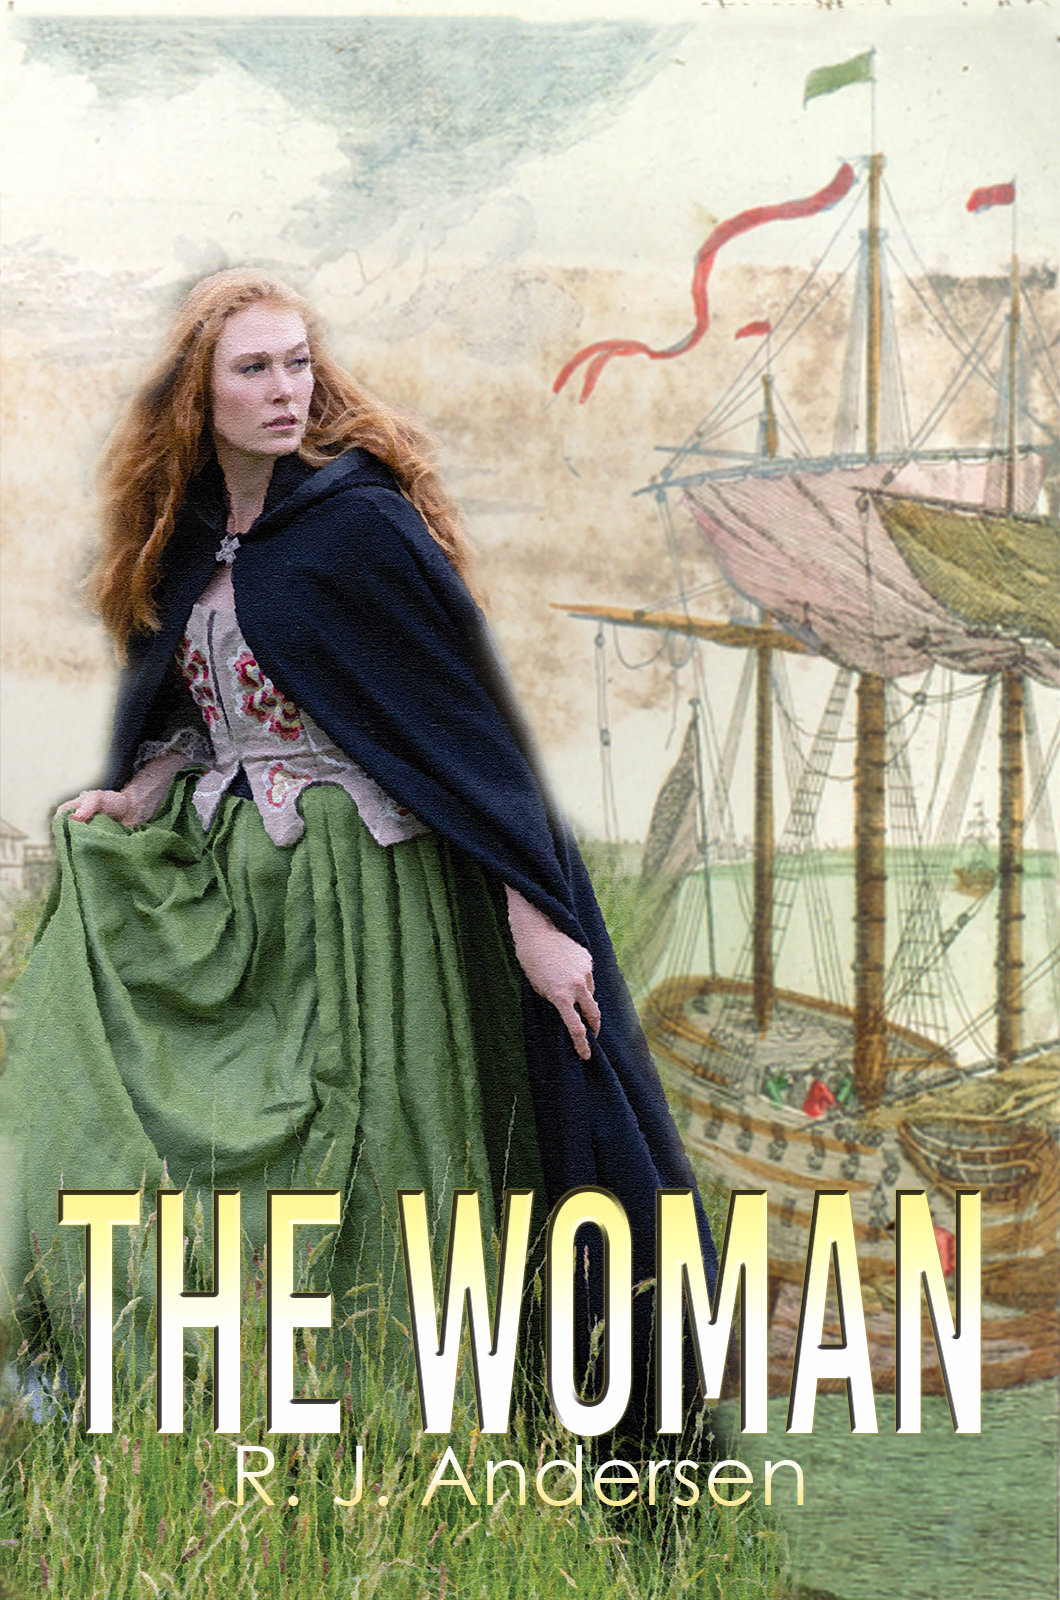 This image is the cover for the book The Woman